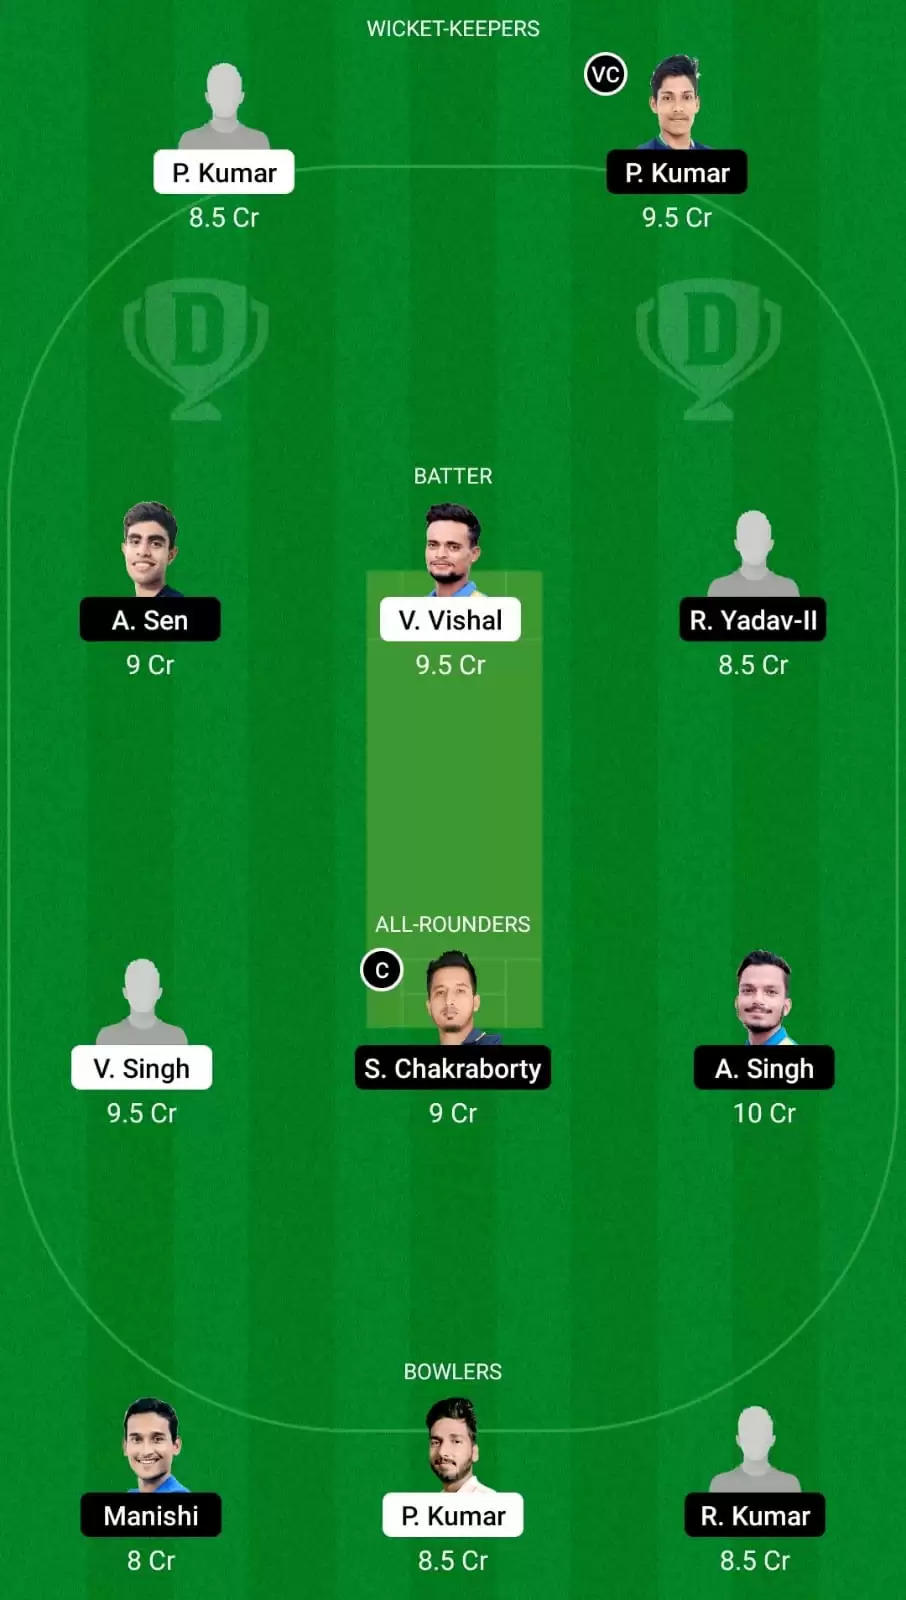 BOK vs RAN Dream11 Team Prediction for Jharkhand T20 League 2021: Bokaro Blasters vs Ranchi Raiders Best Fantasy Cricket Tips, Strongest Playing XI, Pitch Report and Player Updates